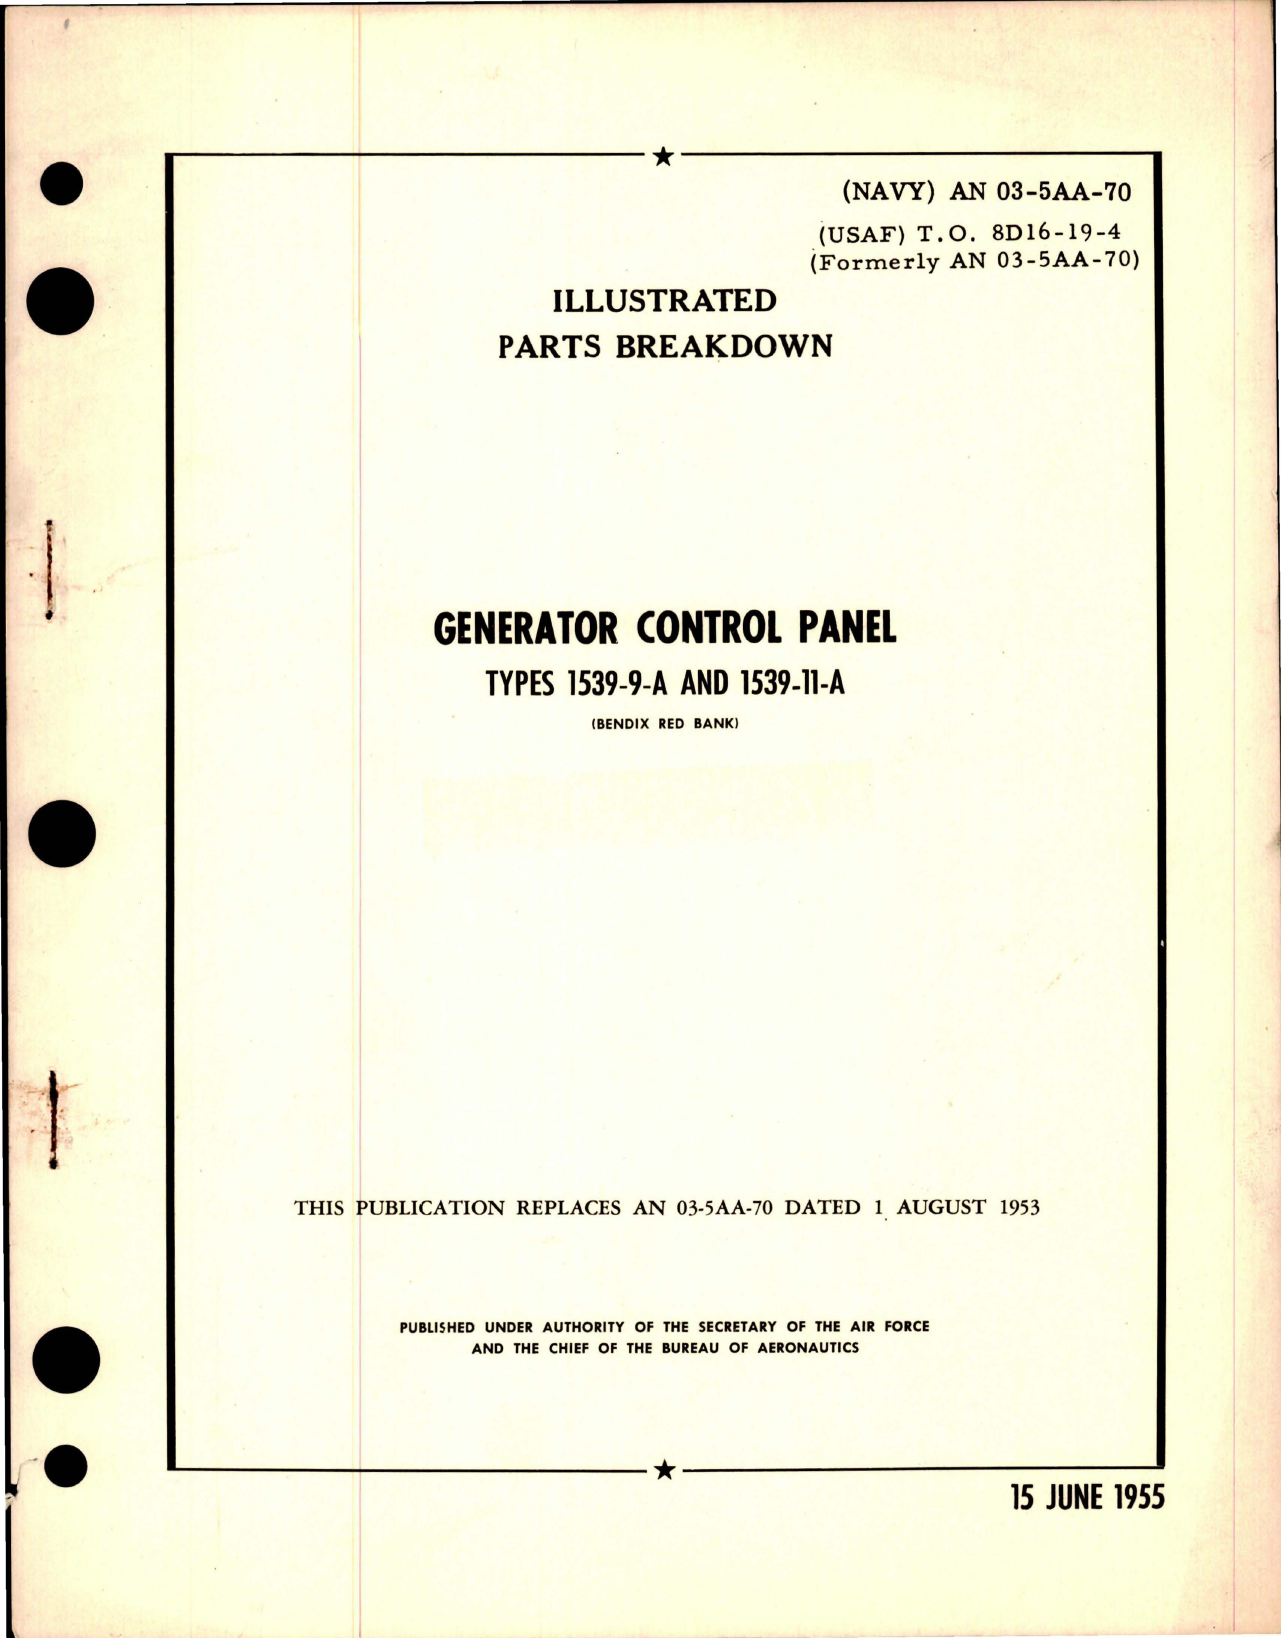 Sample page 1 from AirCorps Library document: Illustrated Parts Breakdown for Generator Control Panel - Type 1539-9-A and 1539-11-A 